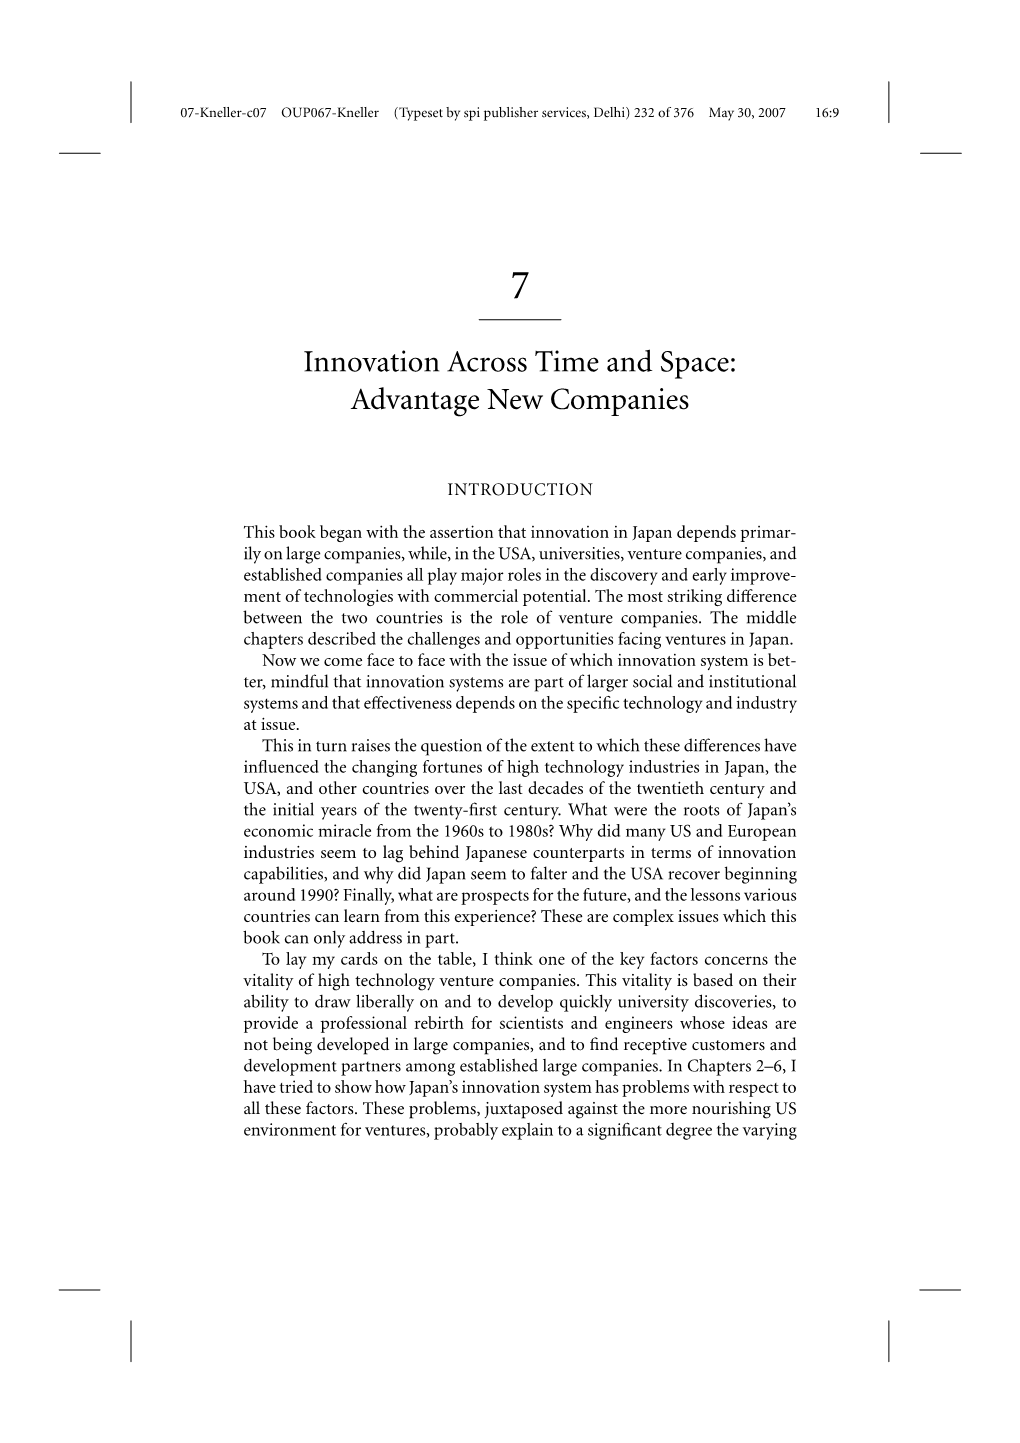 Innovation Across Time and Space: Advantage New Companies